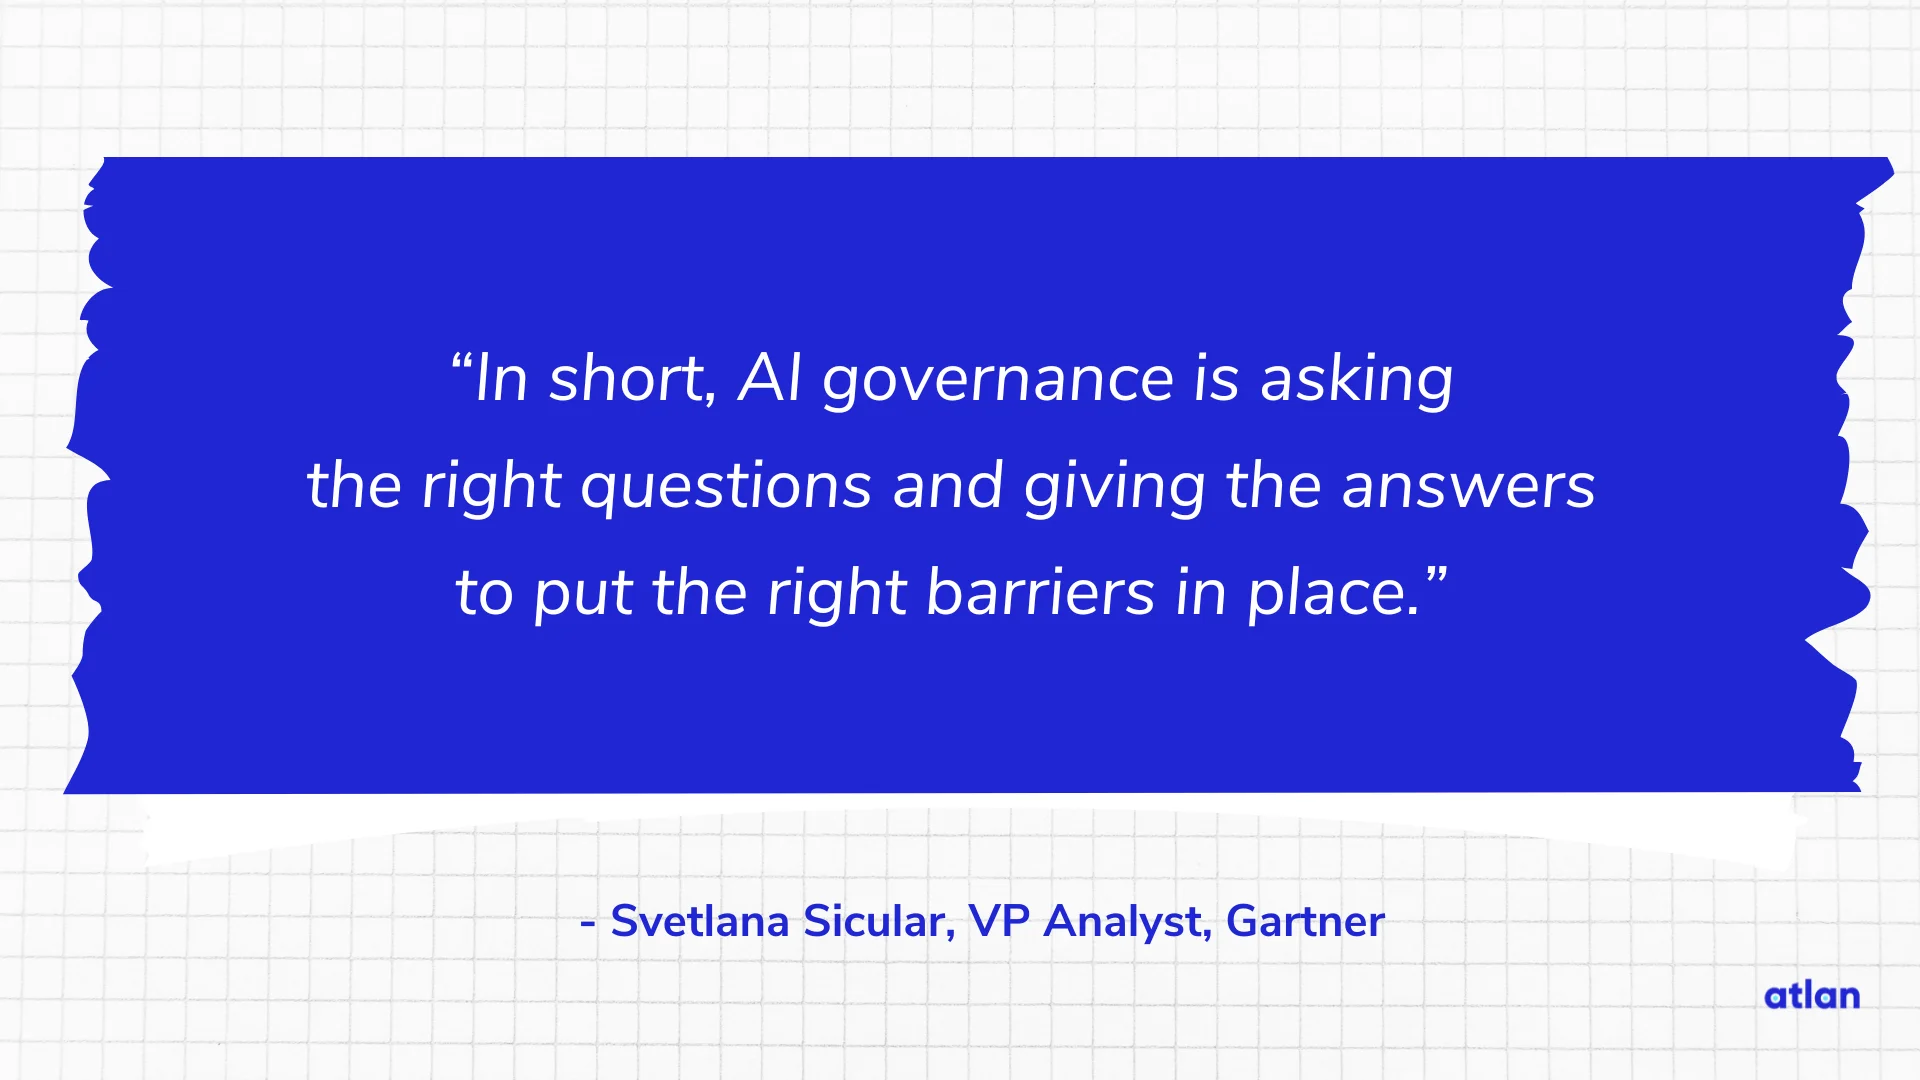 AI governance is asking the right questions and giving the answers